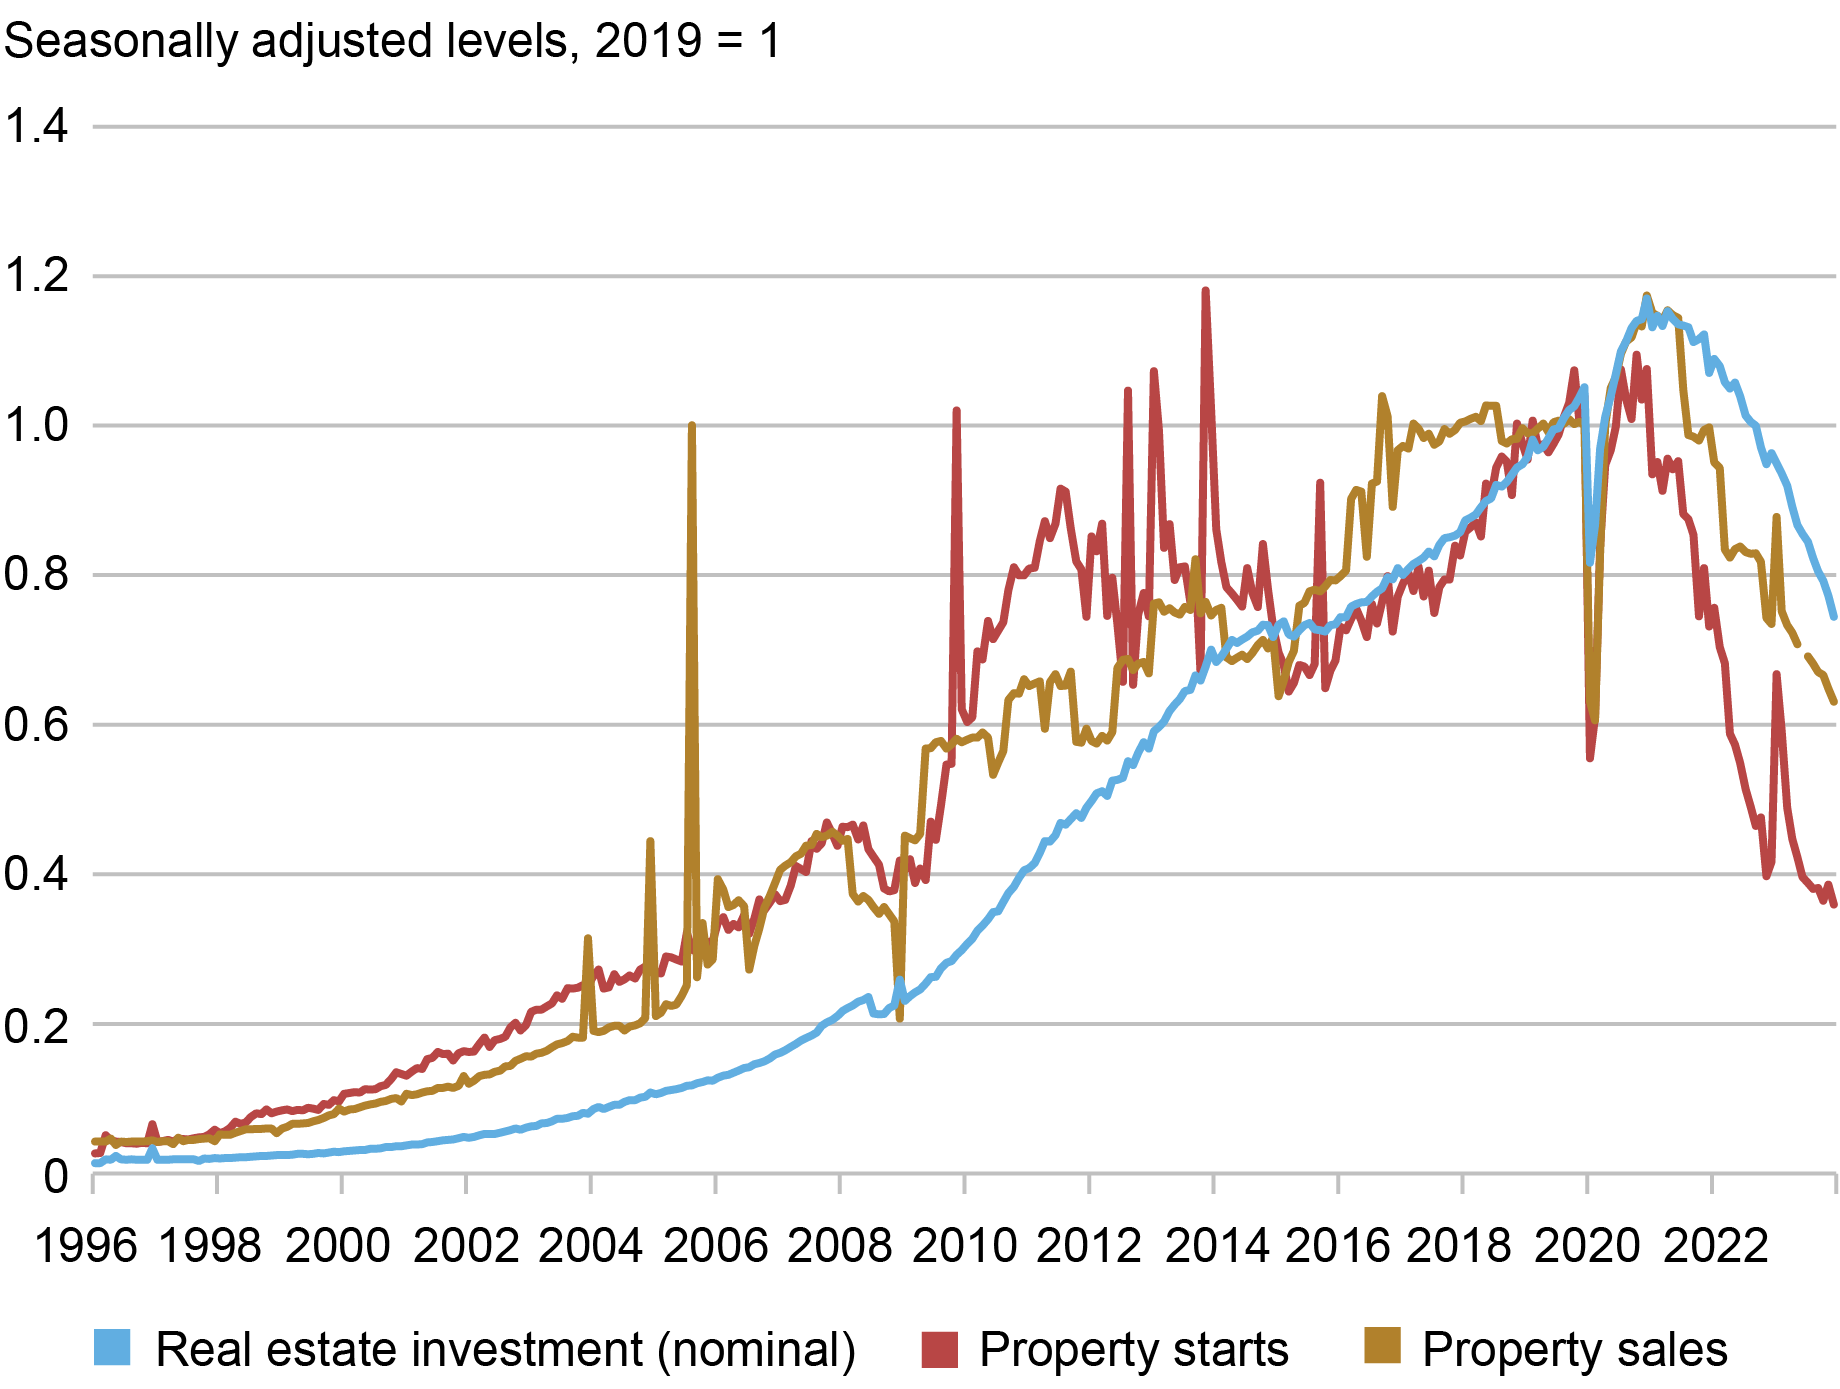 line chart showing real estate investments (blue), property starts (red), and property sales (gold) in China from 1996 through 2022; data are seasonally adjusted and indexed to 2019. Property starts and sales fell by two-thirds and one-third respectively since 2020. 